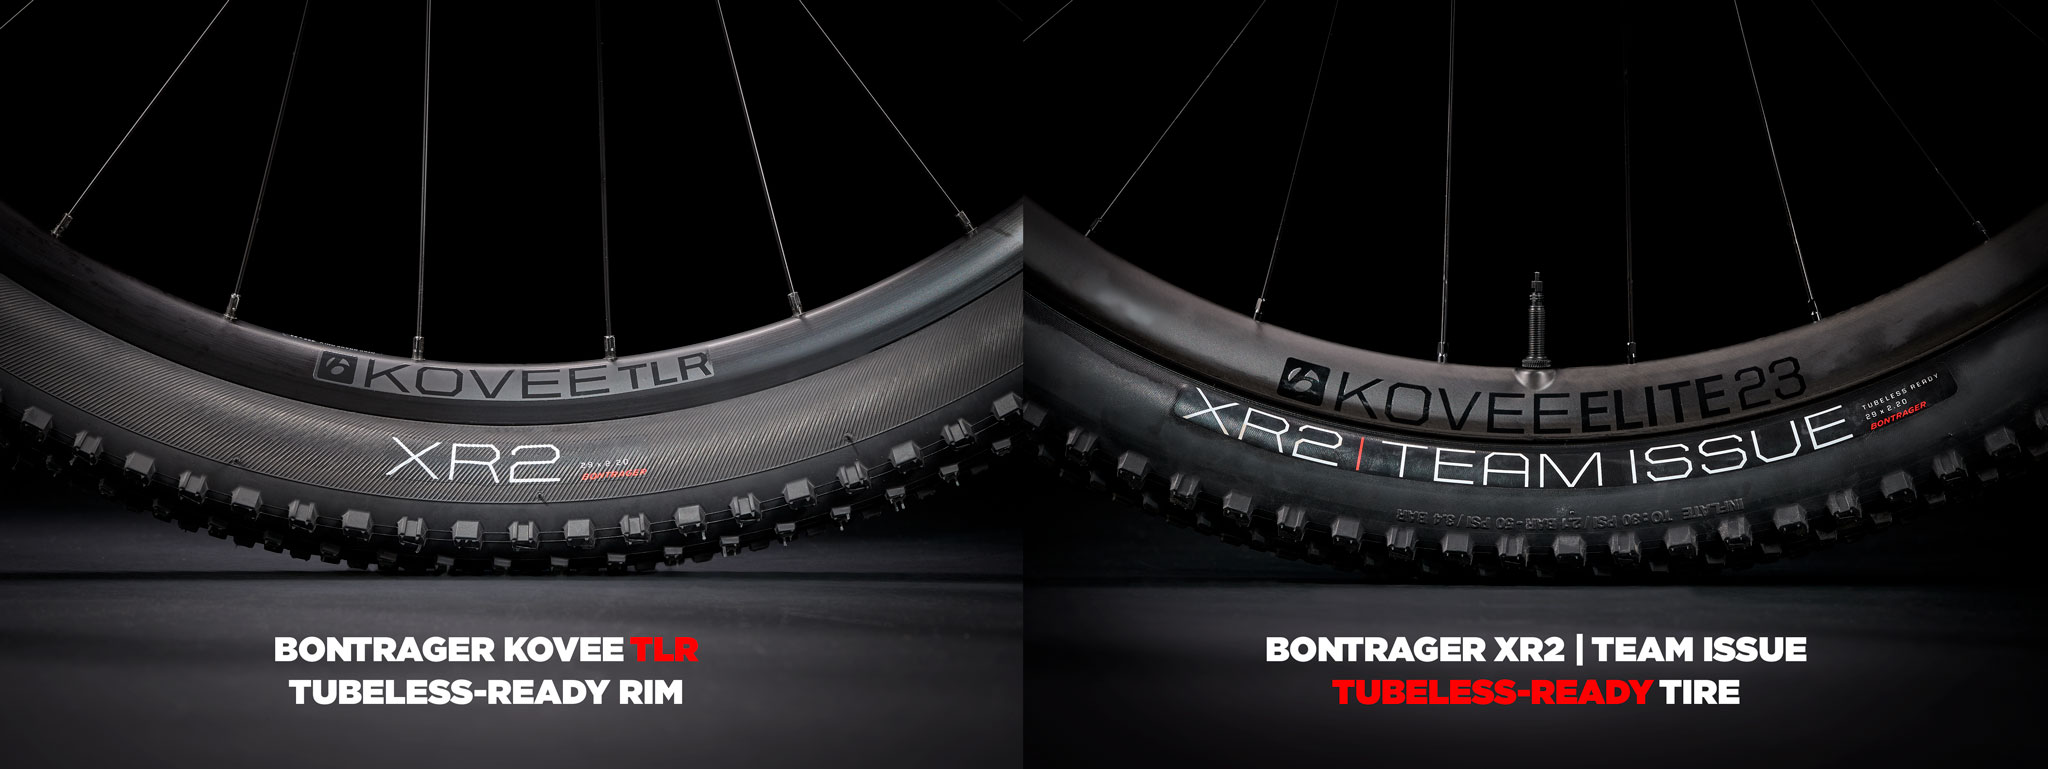 Bontrager-Tubeless-Rims-and-Tires